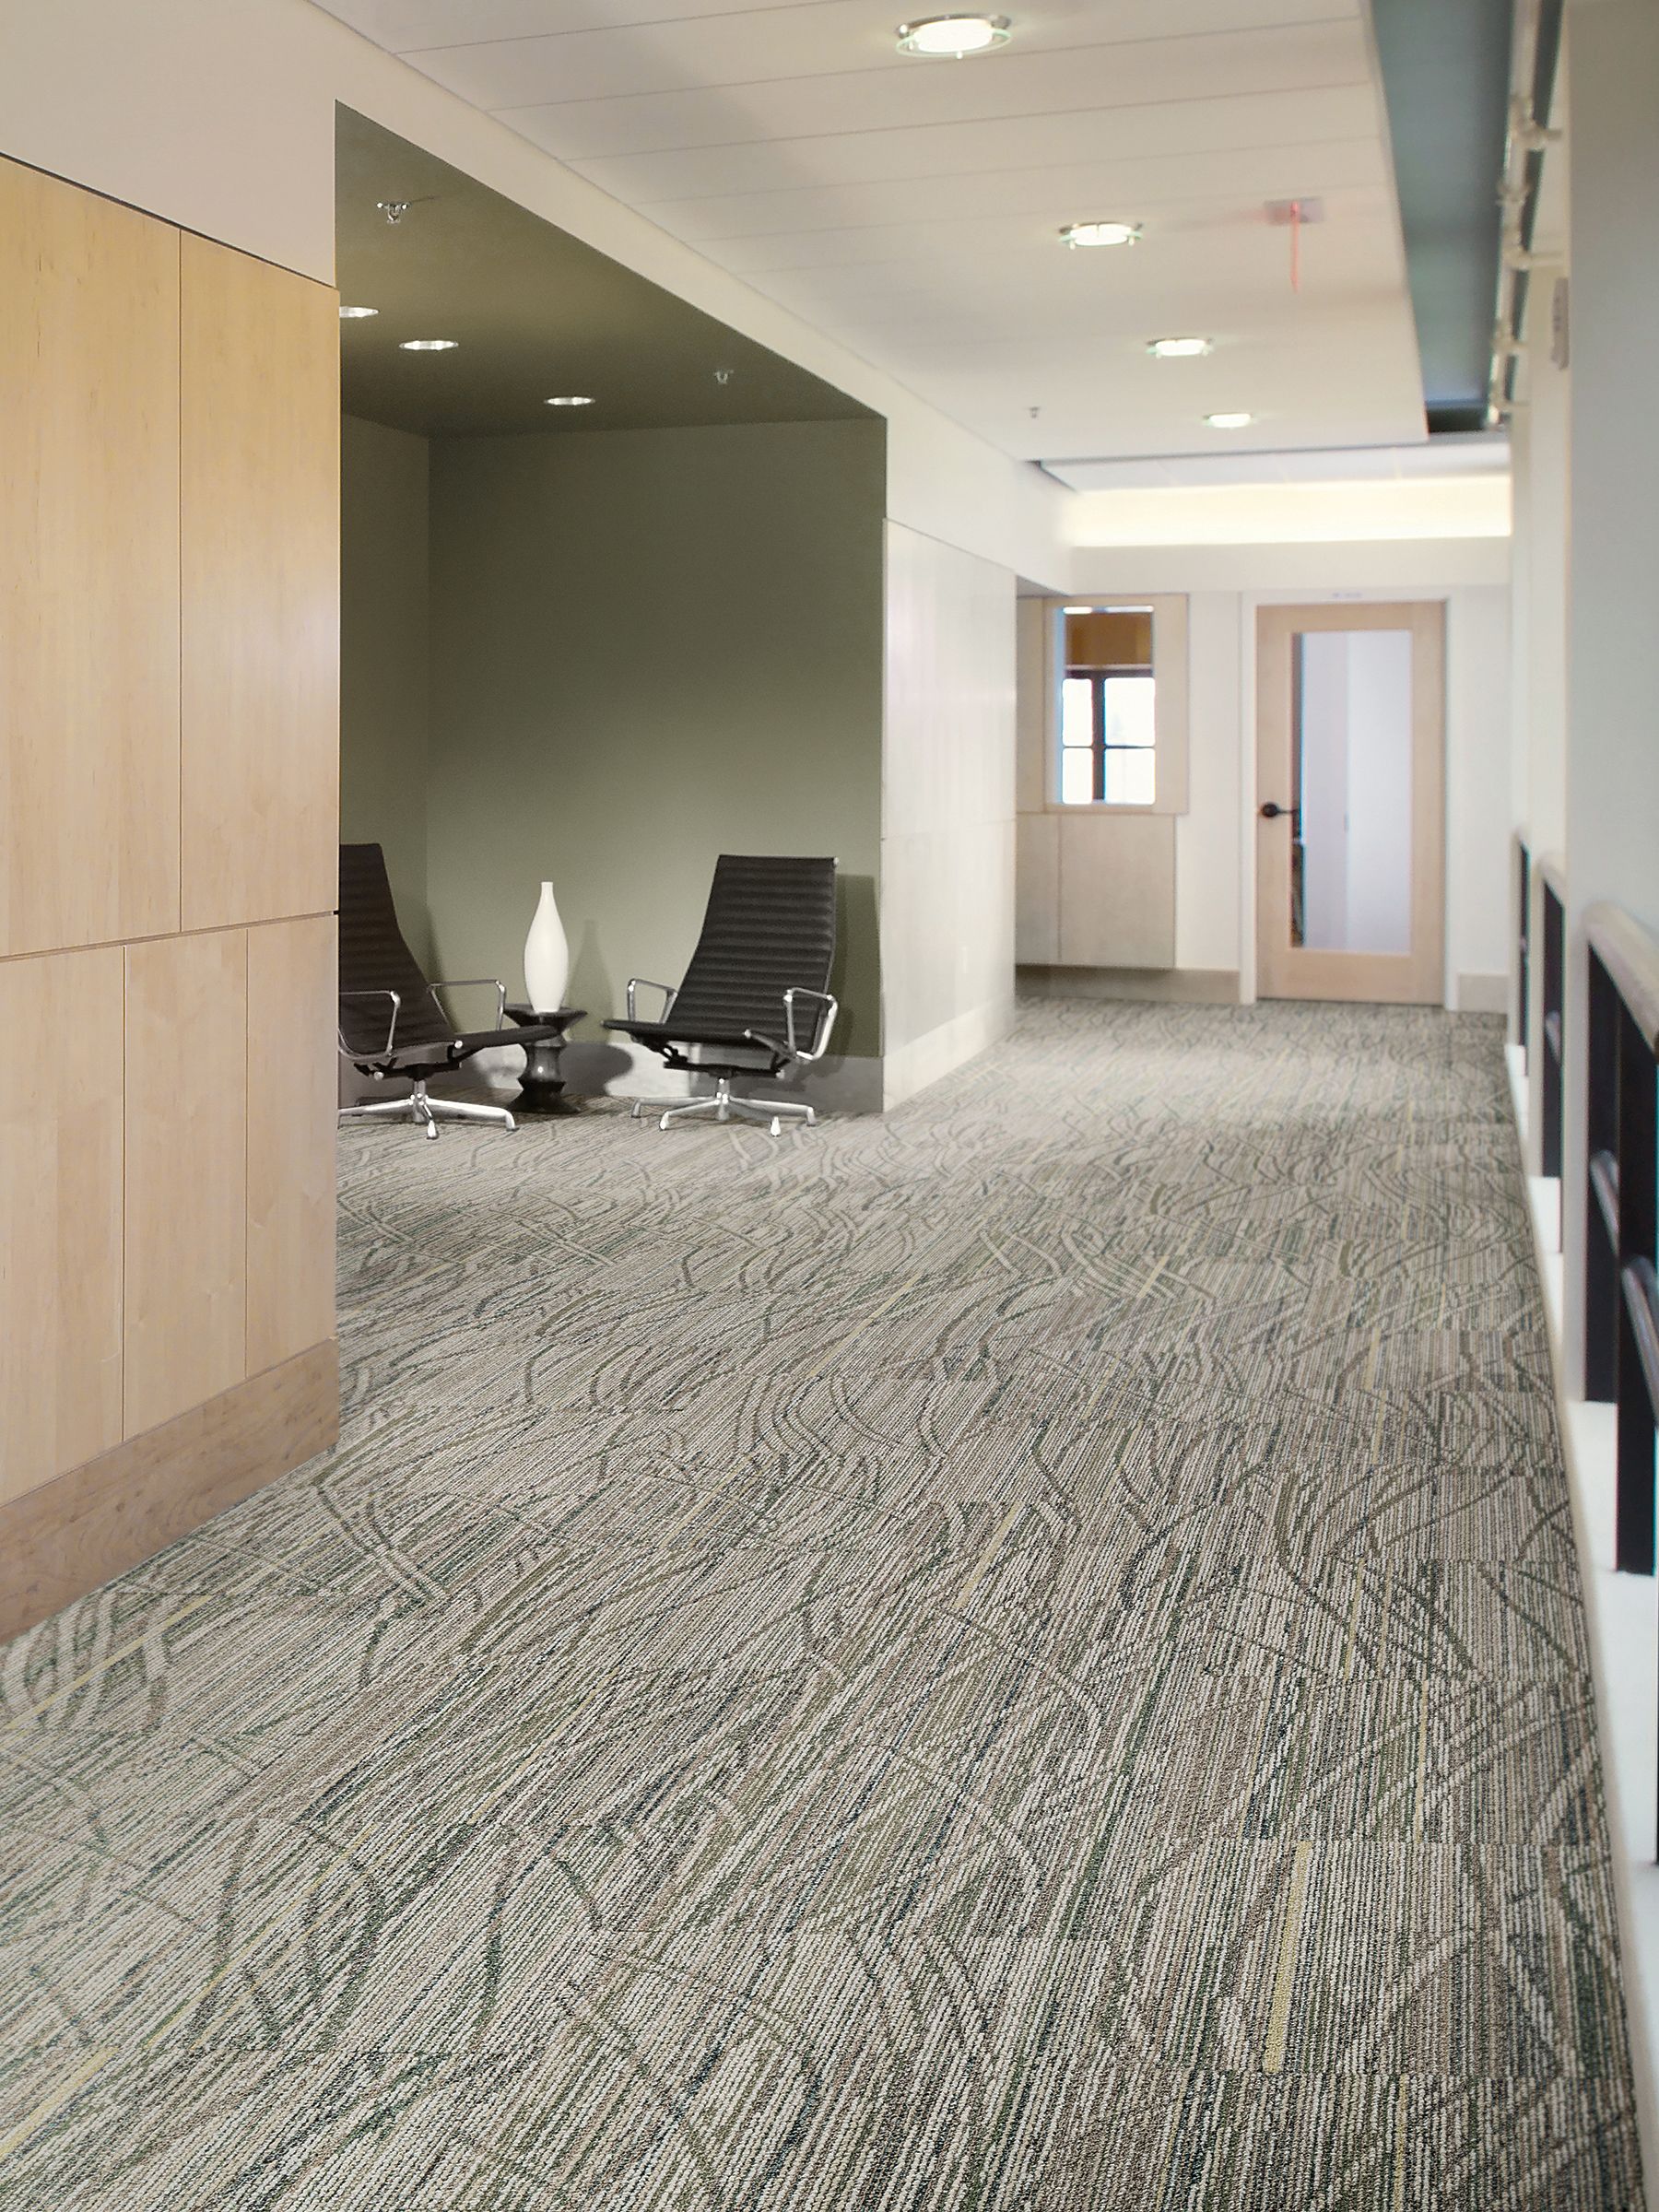 Interface Prairie Grass Loop carpet tile in corridor with seating area on side image number 8